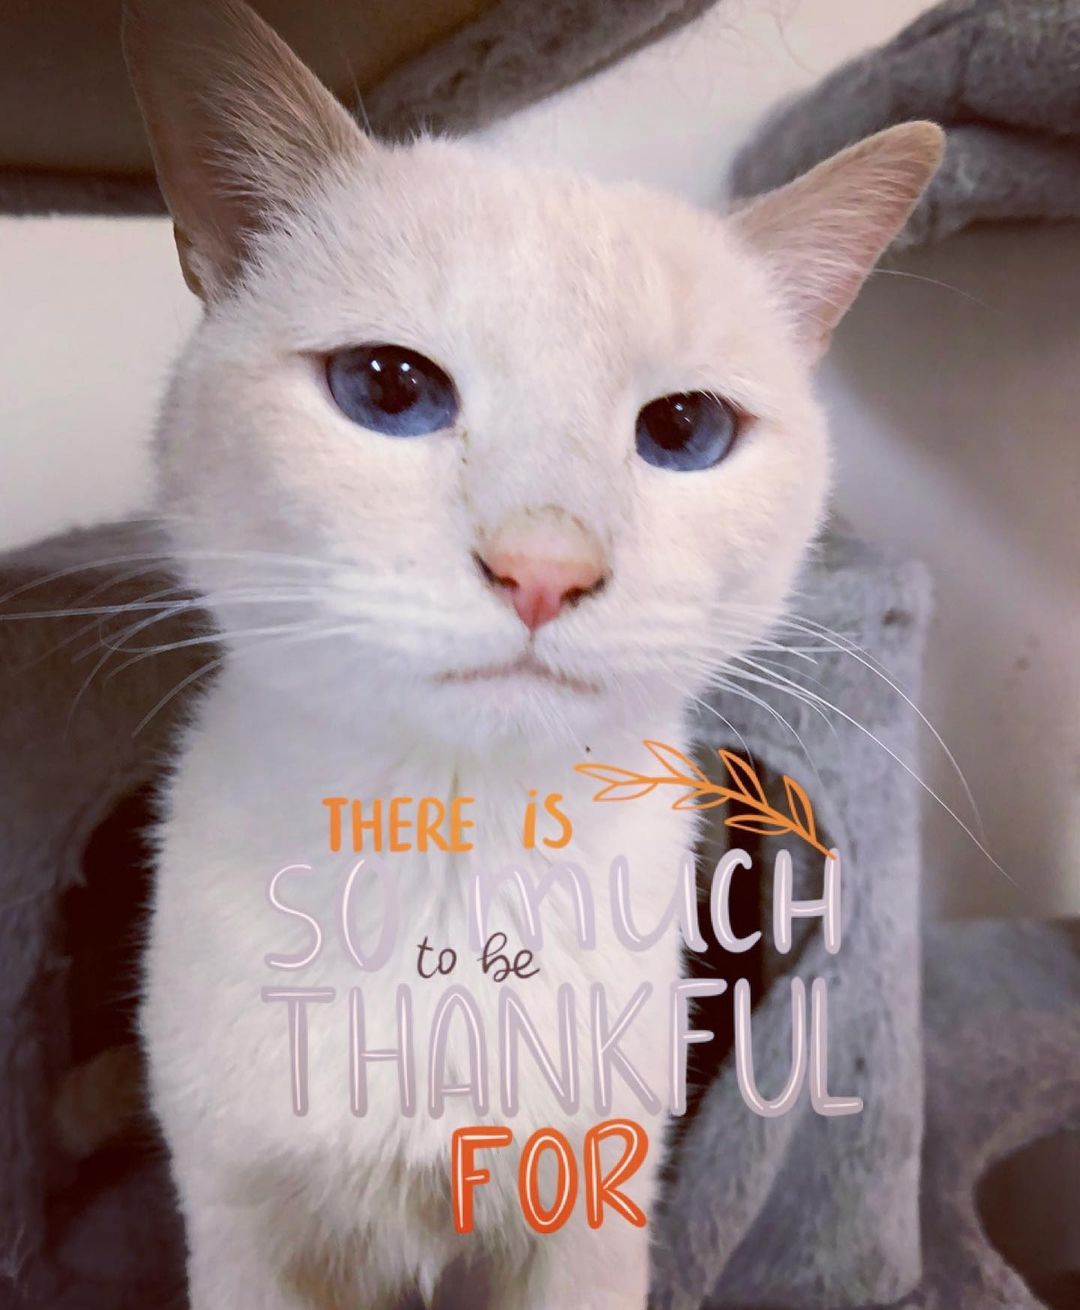 Wishing all of our friends a Happy Thanksgiving. Our new boy here is very thankful to be off the street, warm and dry and food in his tummy. We at Sparkle Cat Rescue are thankful for YOU for your support, and to our amazing fosters who open up their homes to help the forgotten felines we rescue, to our volunteers who are such an important part of our rescue day in and day out. Much love to you all. Xoxo 
.
.
.
.
<a target='_blank' href='https://www.instagram.com/explore/tags/happythanksgivng/'>#happythanksgivng</a> <a target='_blank' href='https://www.instagram.com/explore/tags/thankful/'>#thankful</a> <a target='_blank' href='https://www.instagram.com/explore/tags/catsofinstagram/'>#catsofinstagram</a> <a target='_blank' href='https://www.instagram.com/explore/tags/homelesscats/'>#homelesscats</a> <a target='_blank' href='https://www.instagram.com/explore/tags/rescuecats/'>#rescuecats</a> <a target='_blank' href='https://www.instagram.com/explore/tags/adoptdontshop/'>#adoptdontshop</a> <a target='_blank' href='https://www.instagram.com/explore/tags/blessed/'>#blessed</a> <a target='_blank' href='https://www.instagram.com/explore/tags/spayandneuter/'>#spayandneuter</a>